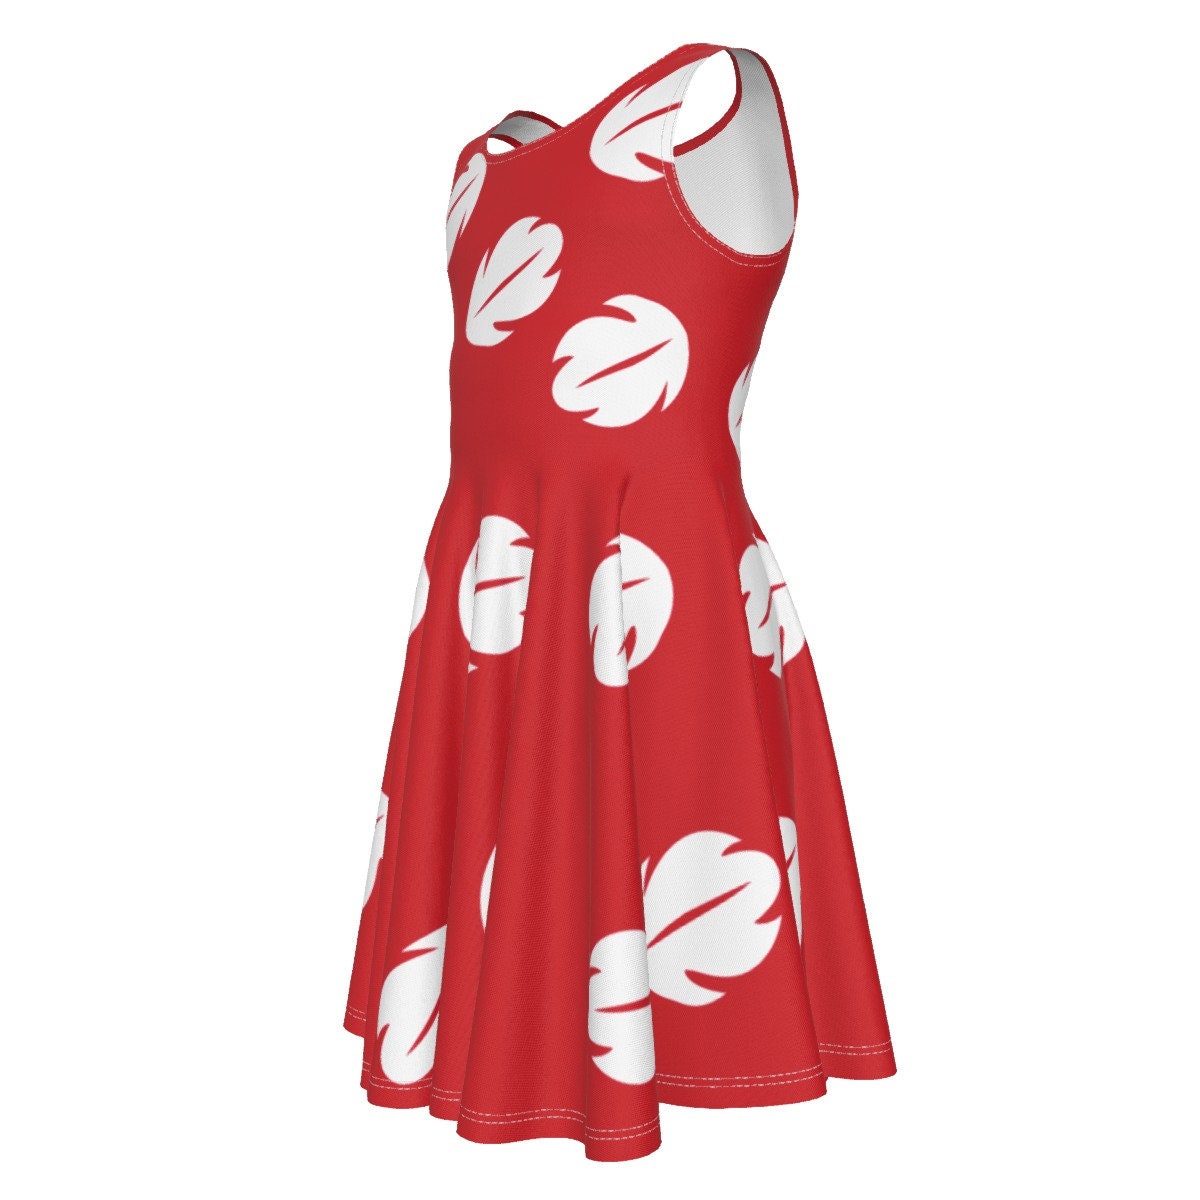 New Disney100 Corkcicles Featuring Lilo's Dress Pattern and